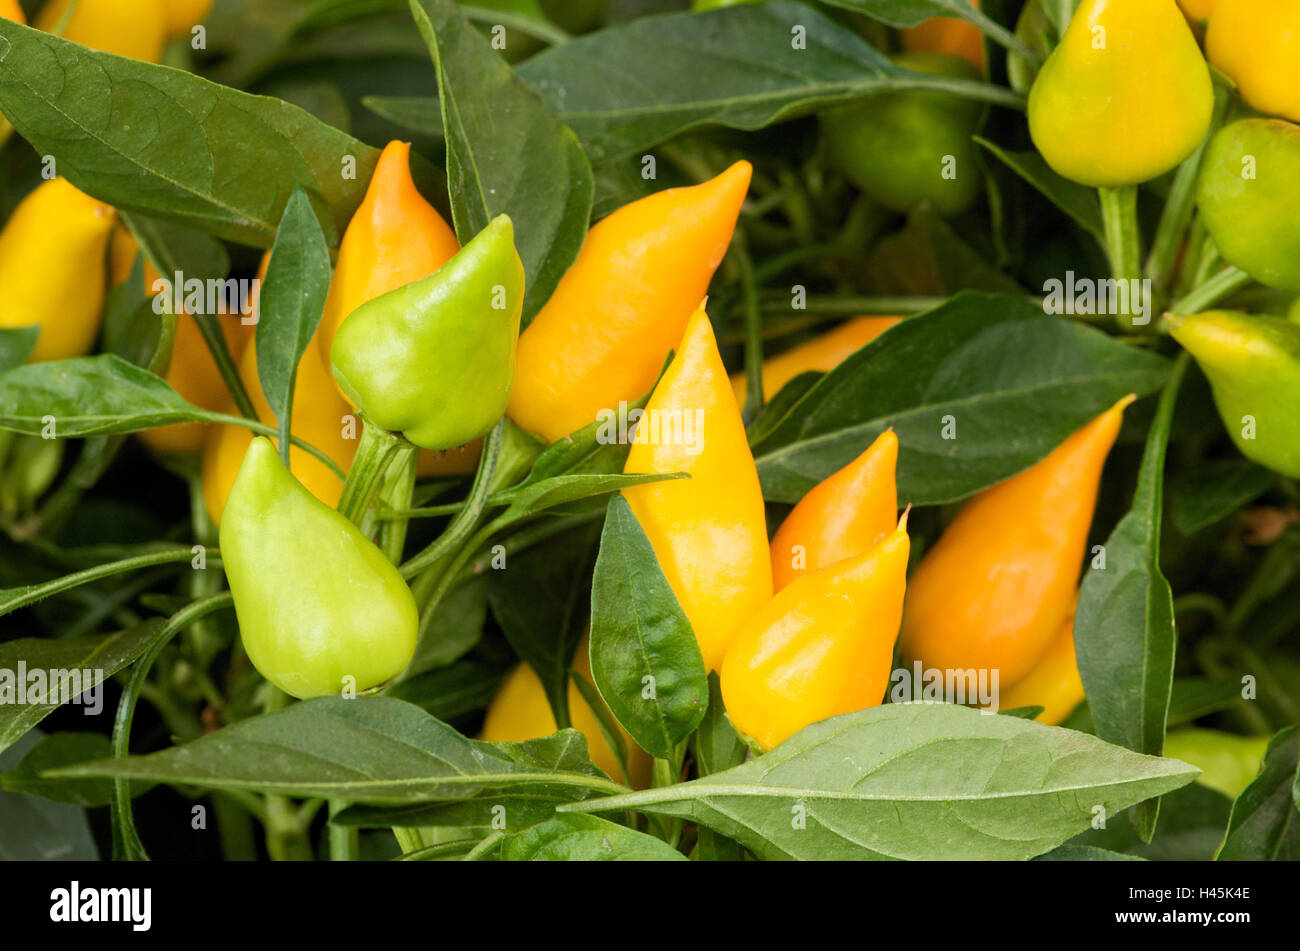 Plant, chili peppers, Chilli, spices, sharpness, the Far East, Asia, hot, piquant, cooking, paprika plant, spice plant, Chilli, pods, mature, Stock Photo